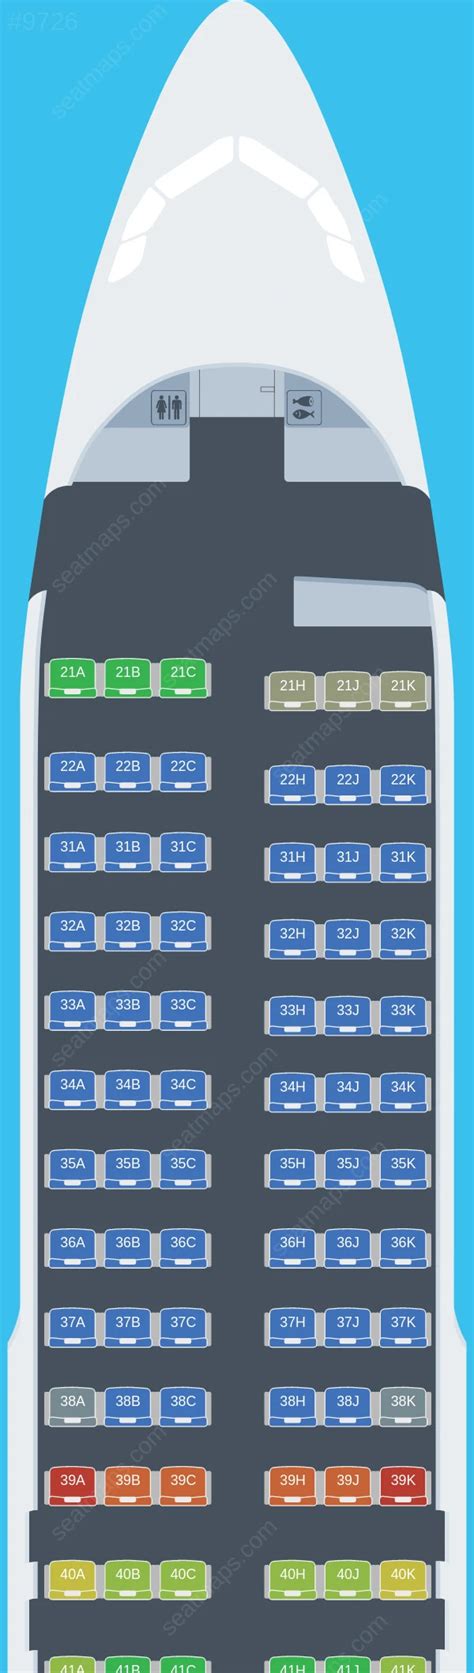 Philippine Airlines Pal Airbus A Seat Map Updated Find The